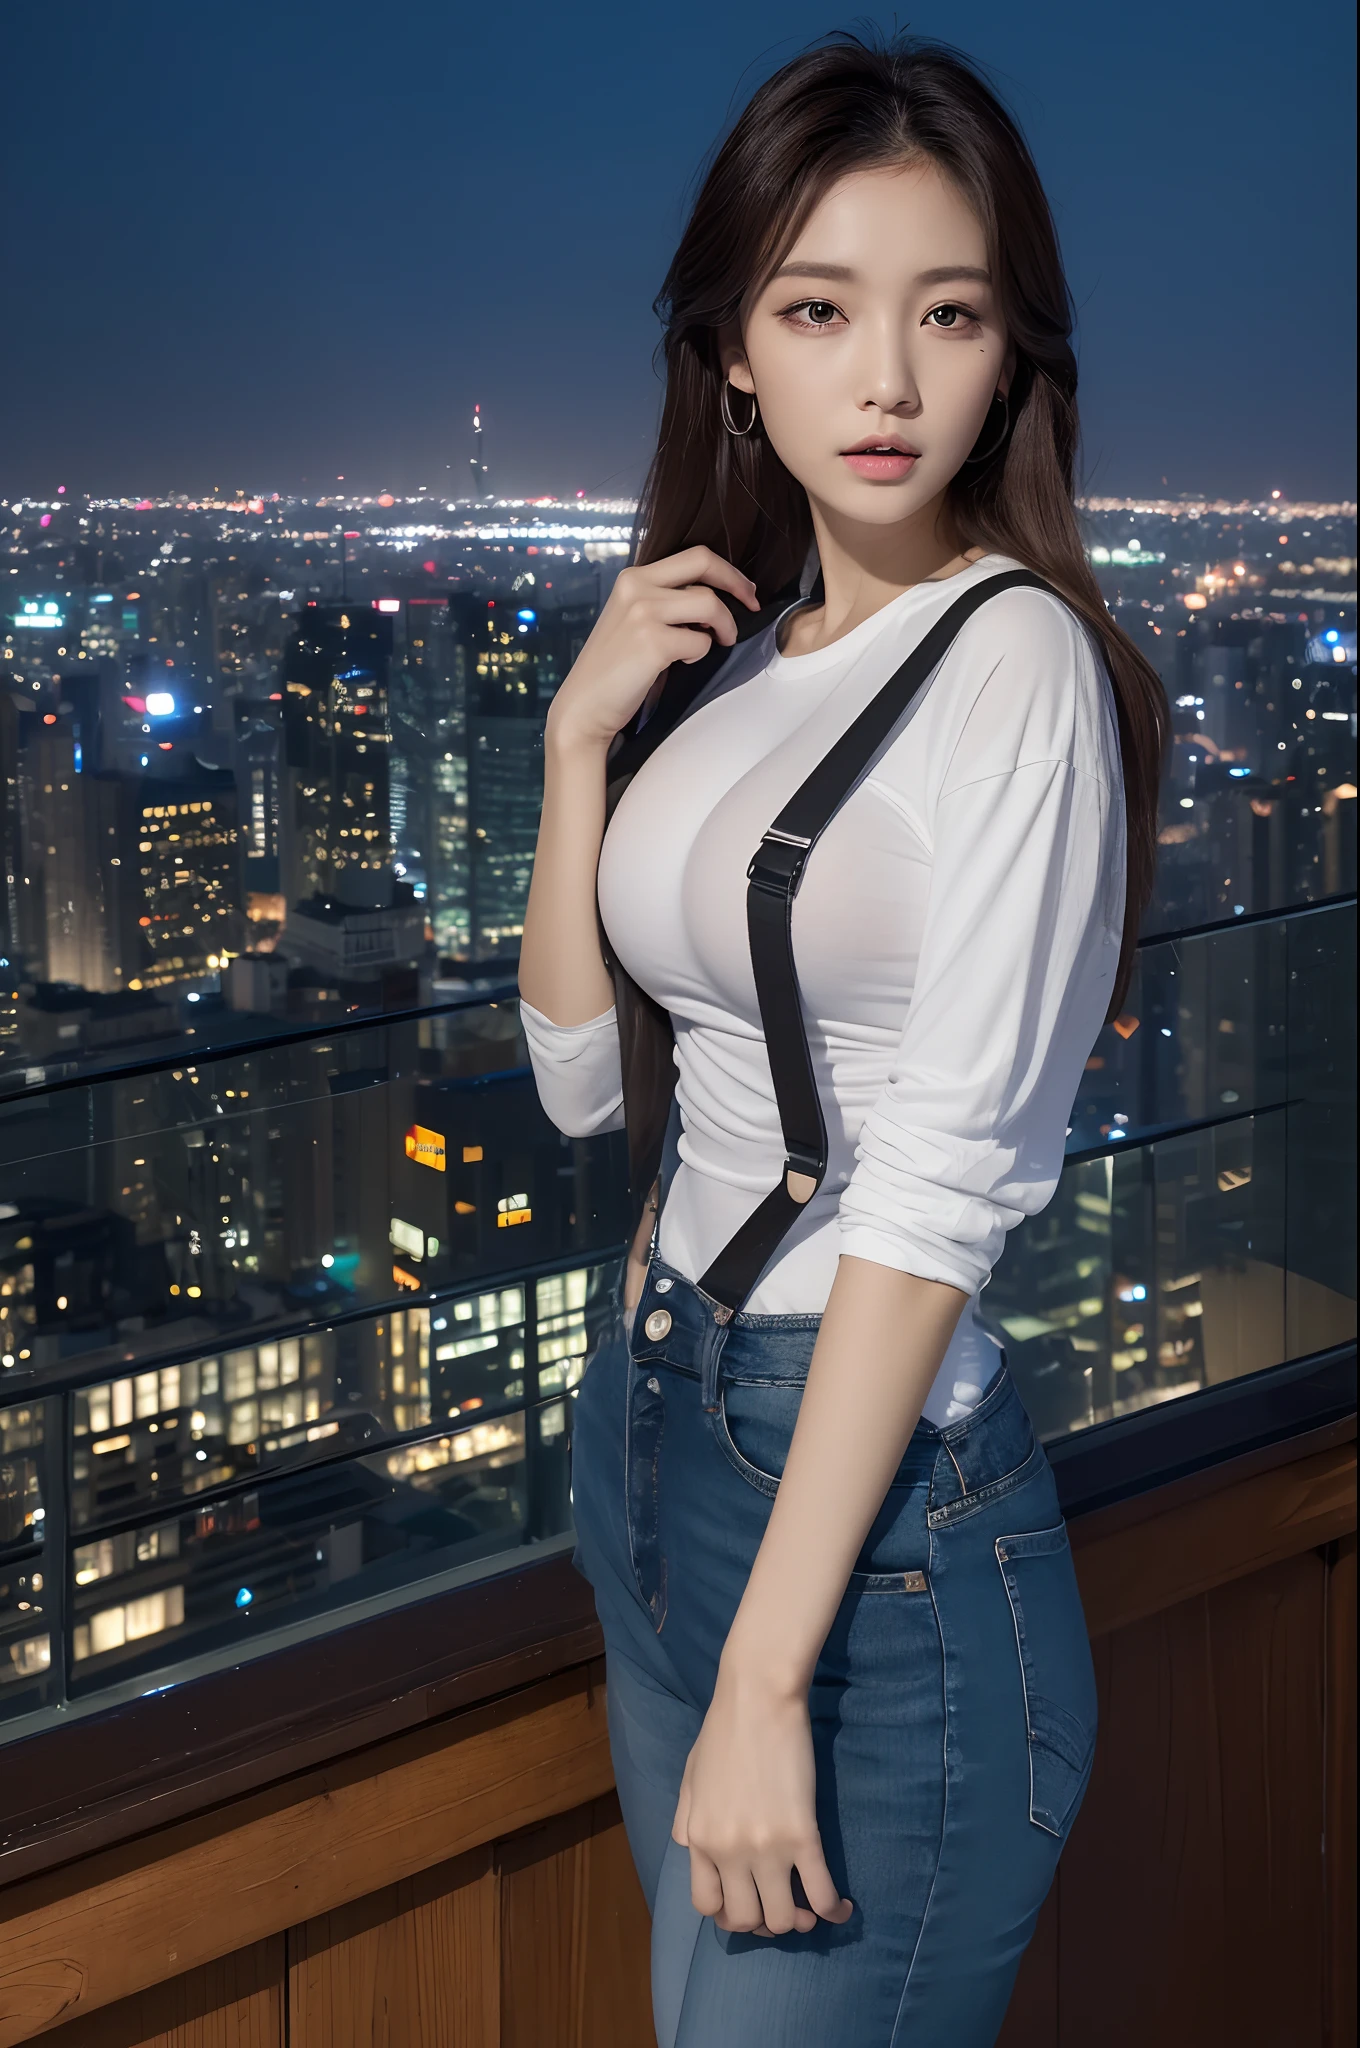 ((Midnight, Best quality, 8k, Masterpiece :1.3)), Whole body, Long legs, Sharp focus :1.2, A pretty woman with perfect figure :1.4, Slender abs :1.1, ((Dark brown hair, Big breasts :1.2)), (White tight tshirt, Jean bib, Standing:1.2), ((Night city view, Rooftop:1.3)), Highly detailed face and skin texture, Detailed eyes, Double eyelid